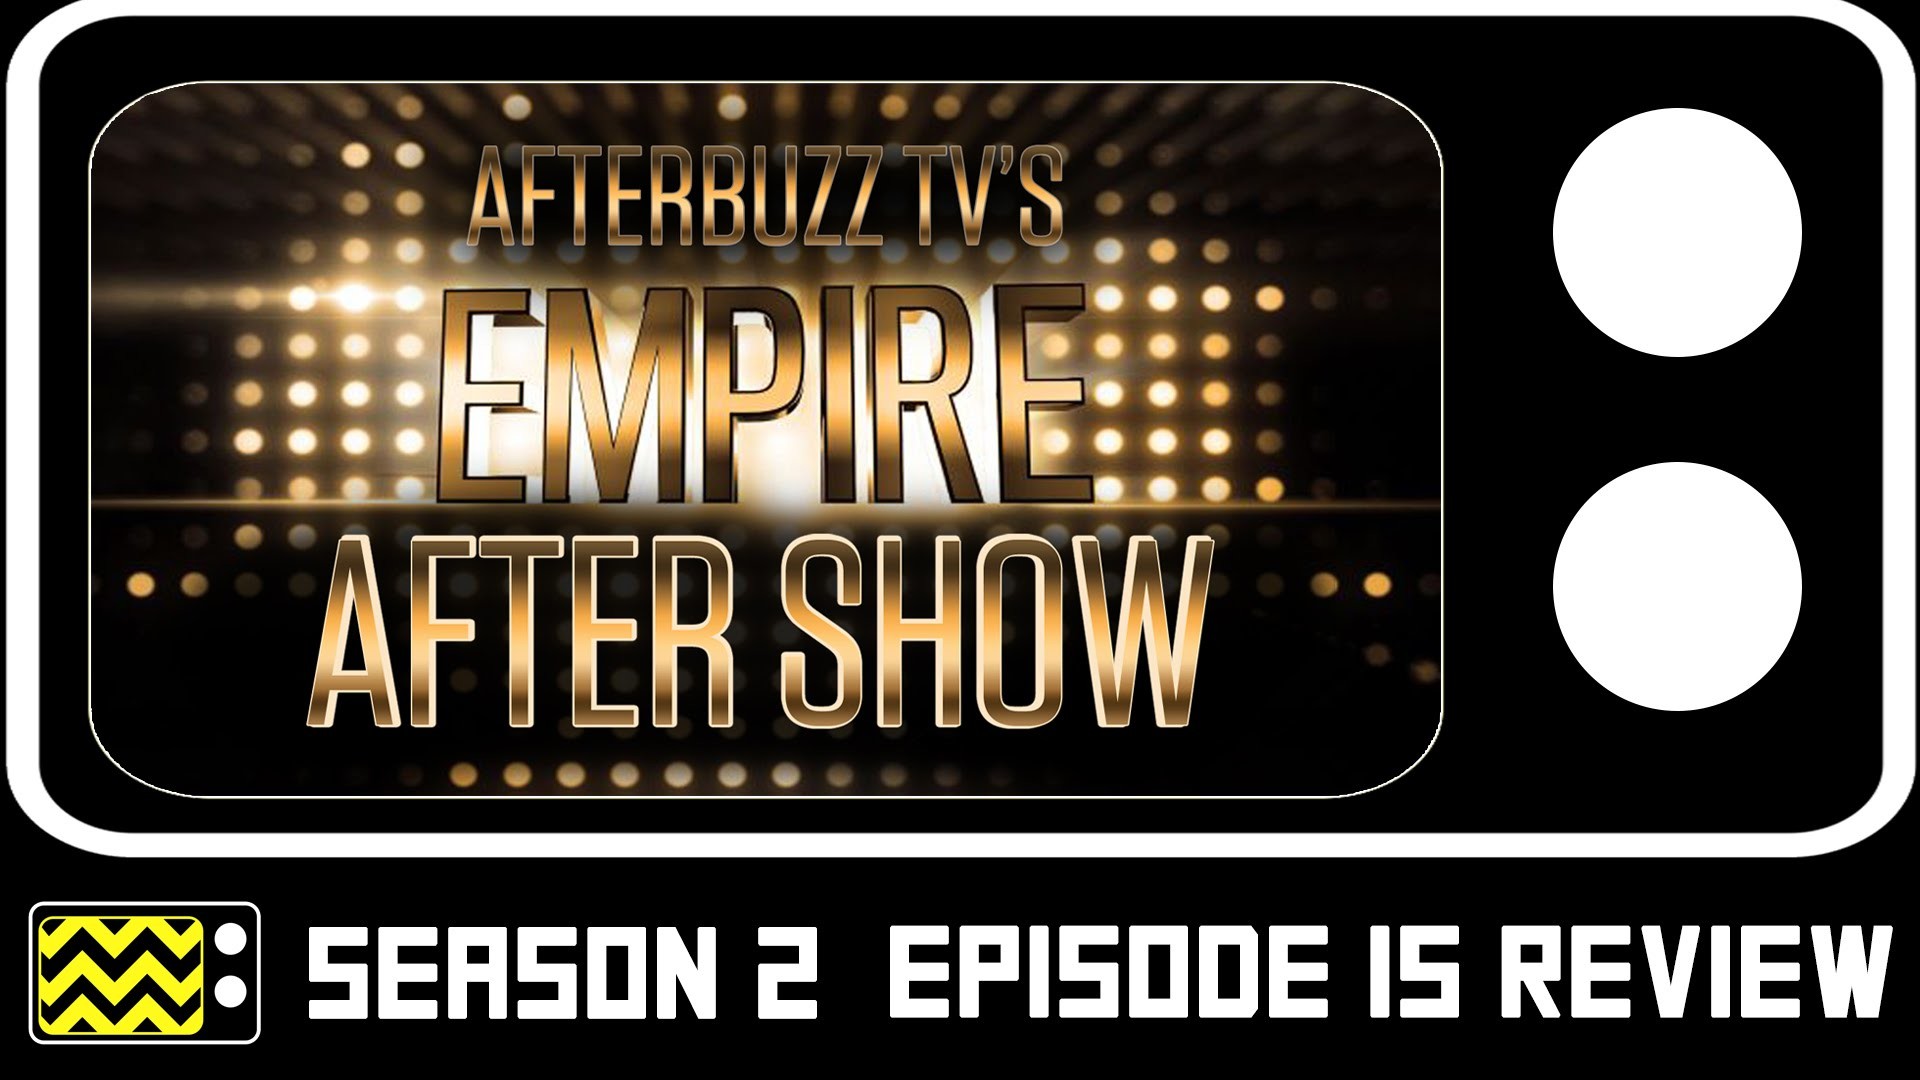 1920x1080 Empire Season 2 Episode 15 Review & After Show | AfterBuzz TV